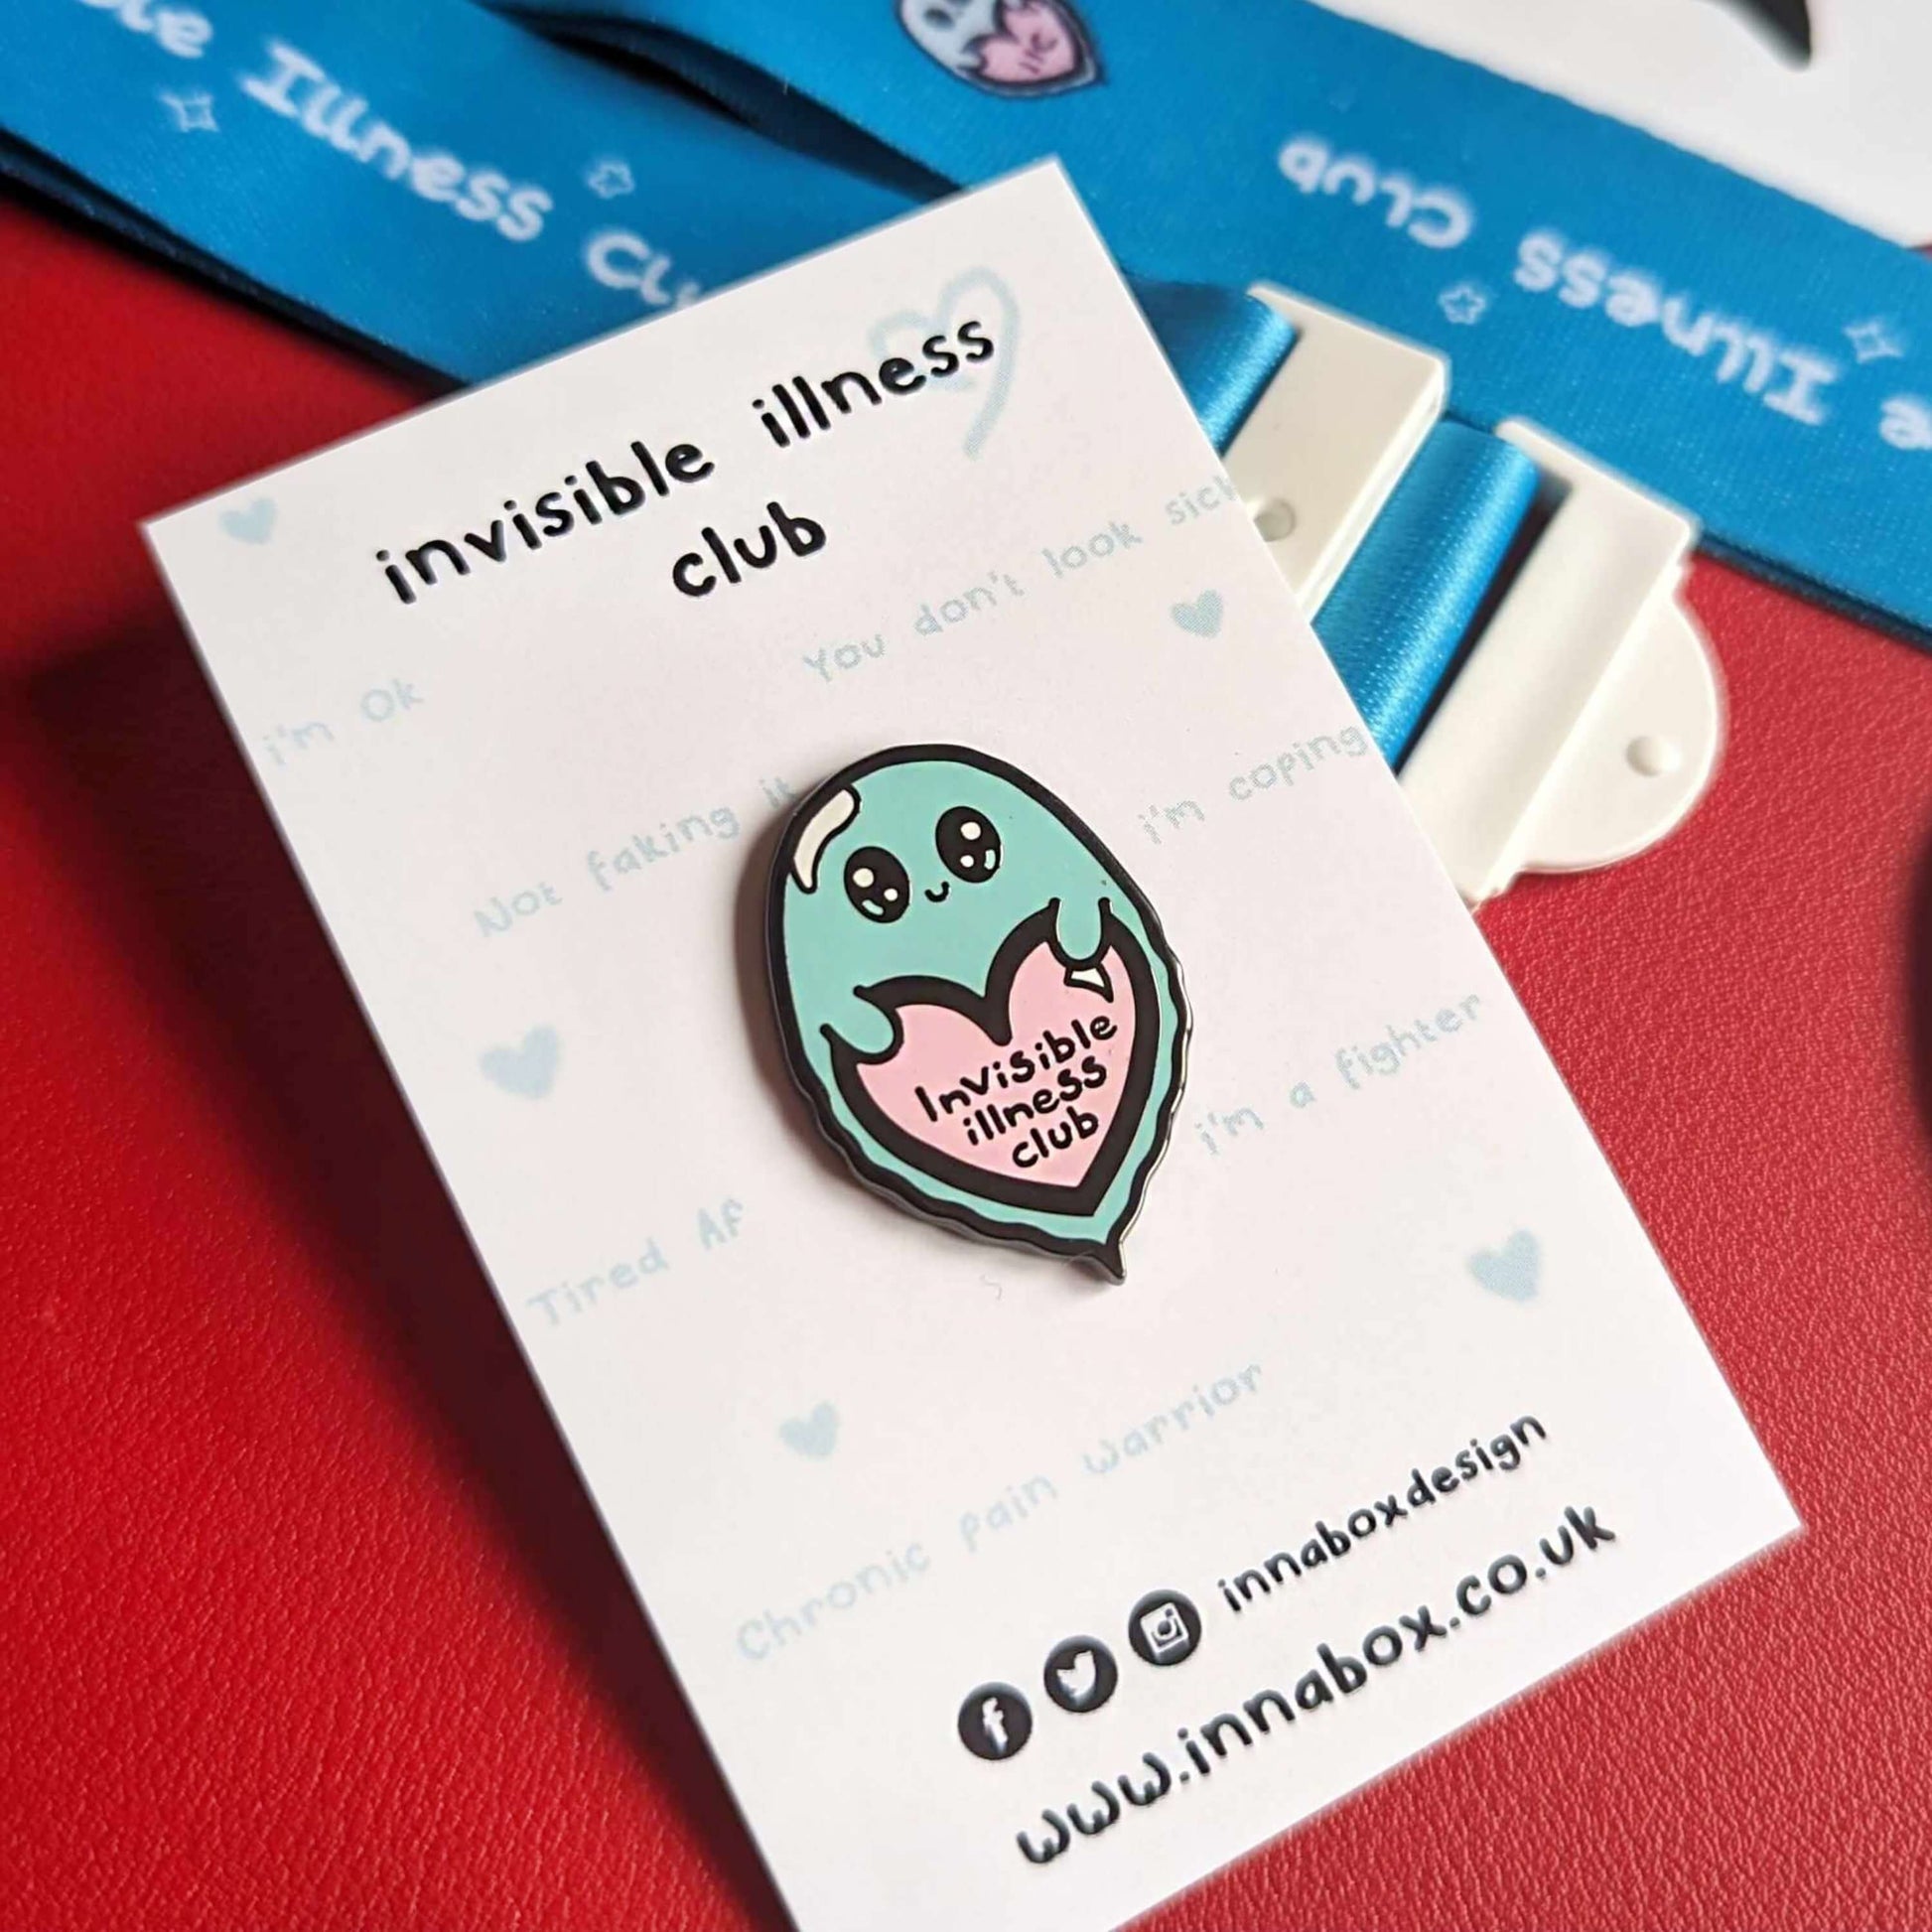 Invisible Illness Club enamel pin attached to it's backing card which has 'invisible illness club' written at the top and Innabox social media details at the bottom, shown on red background. The enamel pin is in the shape of a cute mint green ghost with big eyes and little smile holding a pink heart with it's little hands that has 'invisible illness club' written in black writing in the middle of the heart.